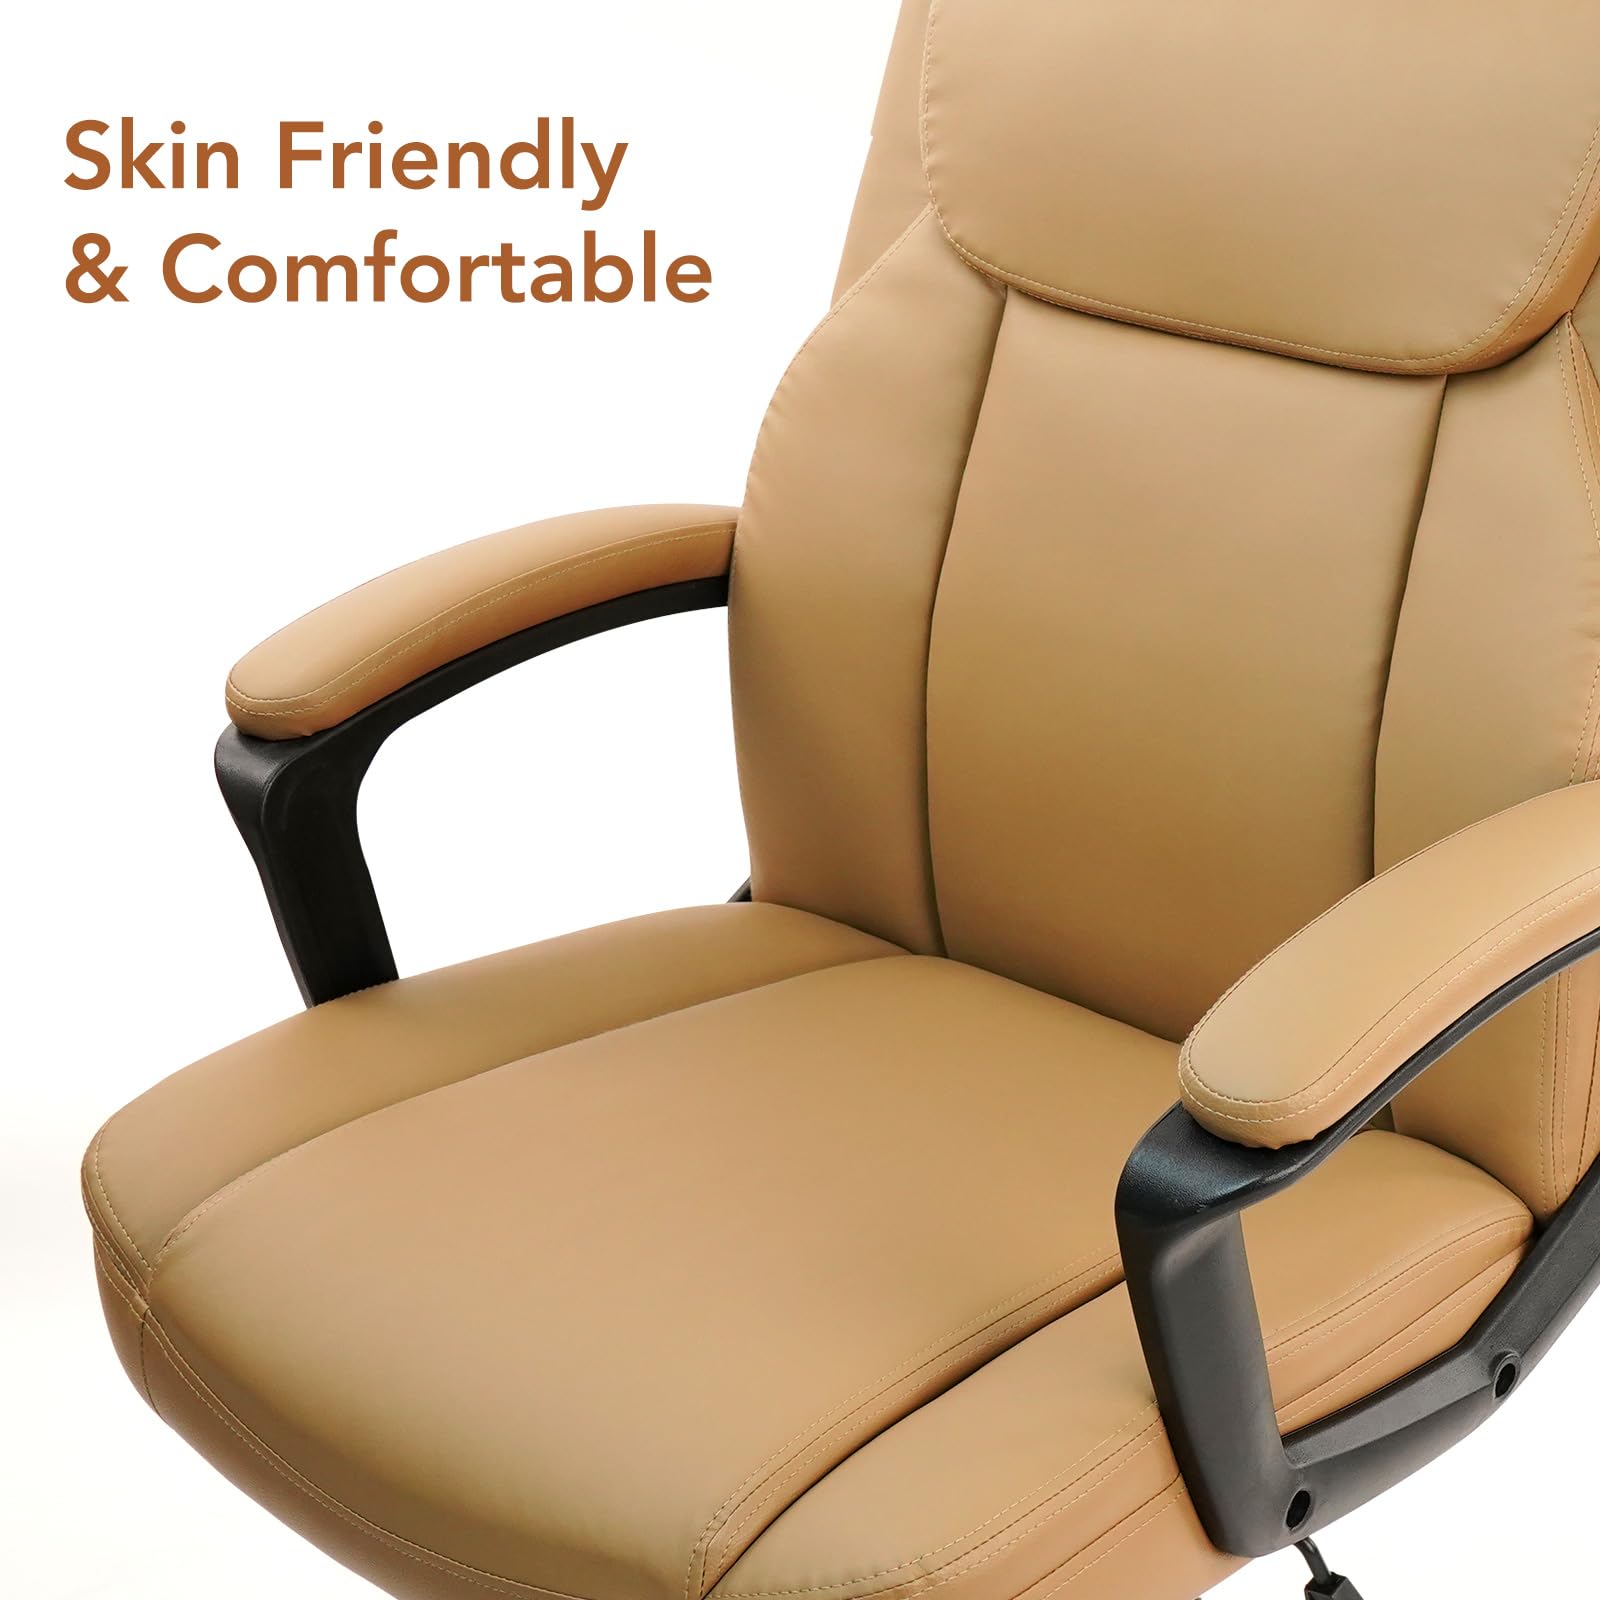 CLATINA Brown Office Chair Computer Chair PU Leather Executive Office Chair Swivel Adjustable Height Chair with Upholstery Fixed armrest Mid-Back Leather Thick Cushion Office Chair Brown